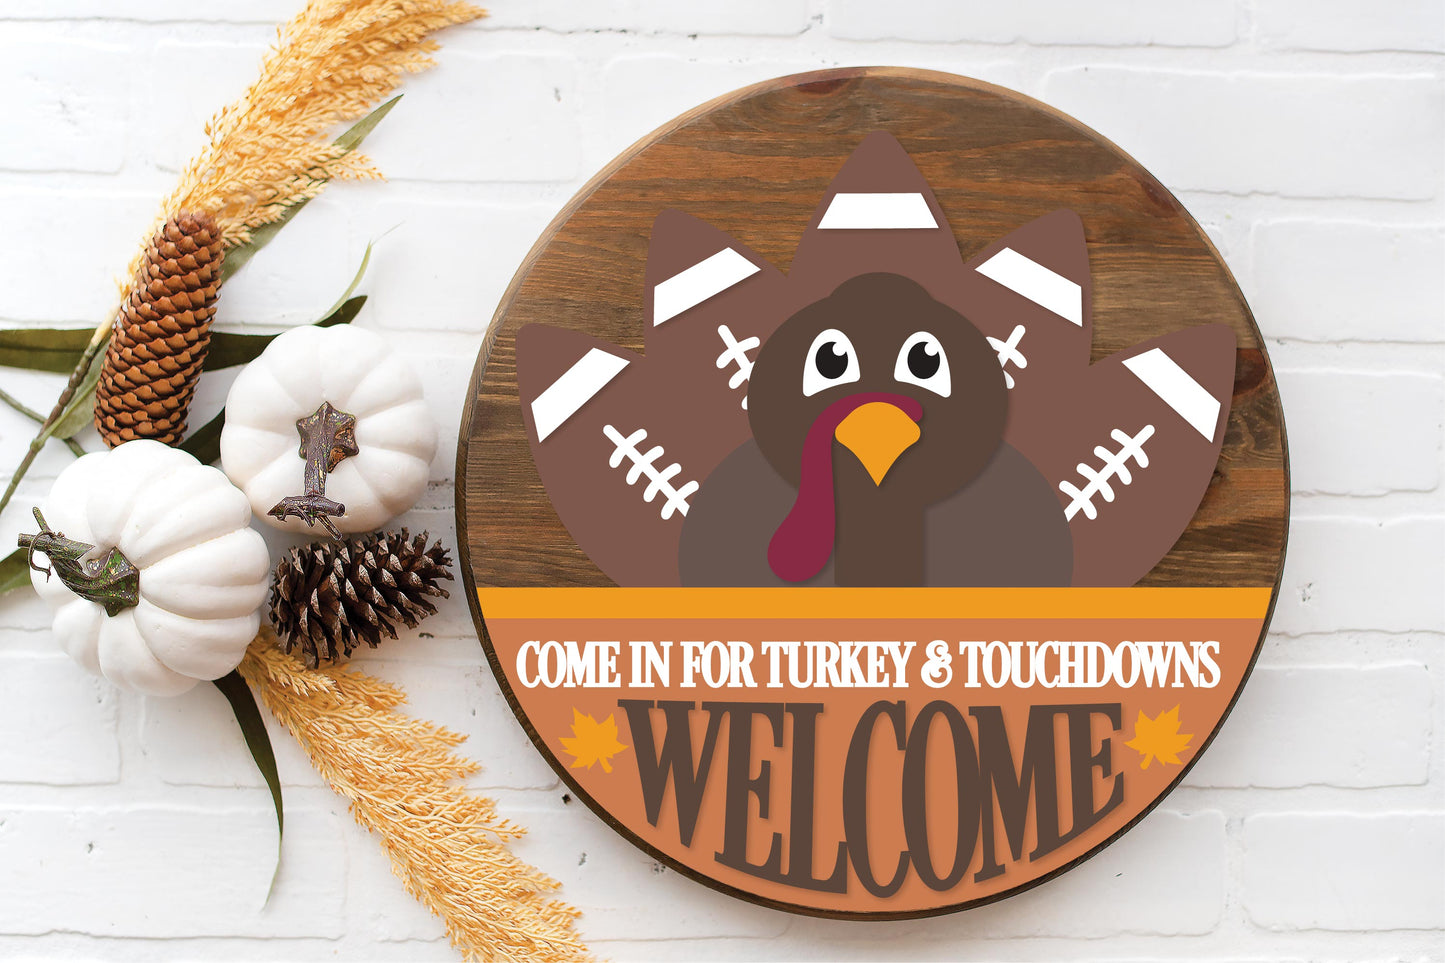 Turkey and touchdowns sign